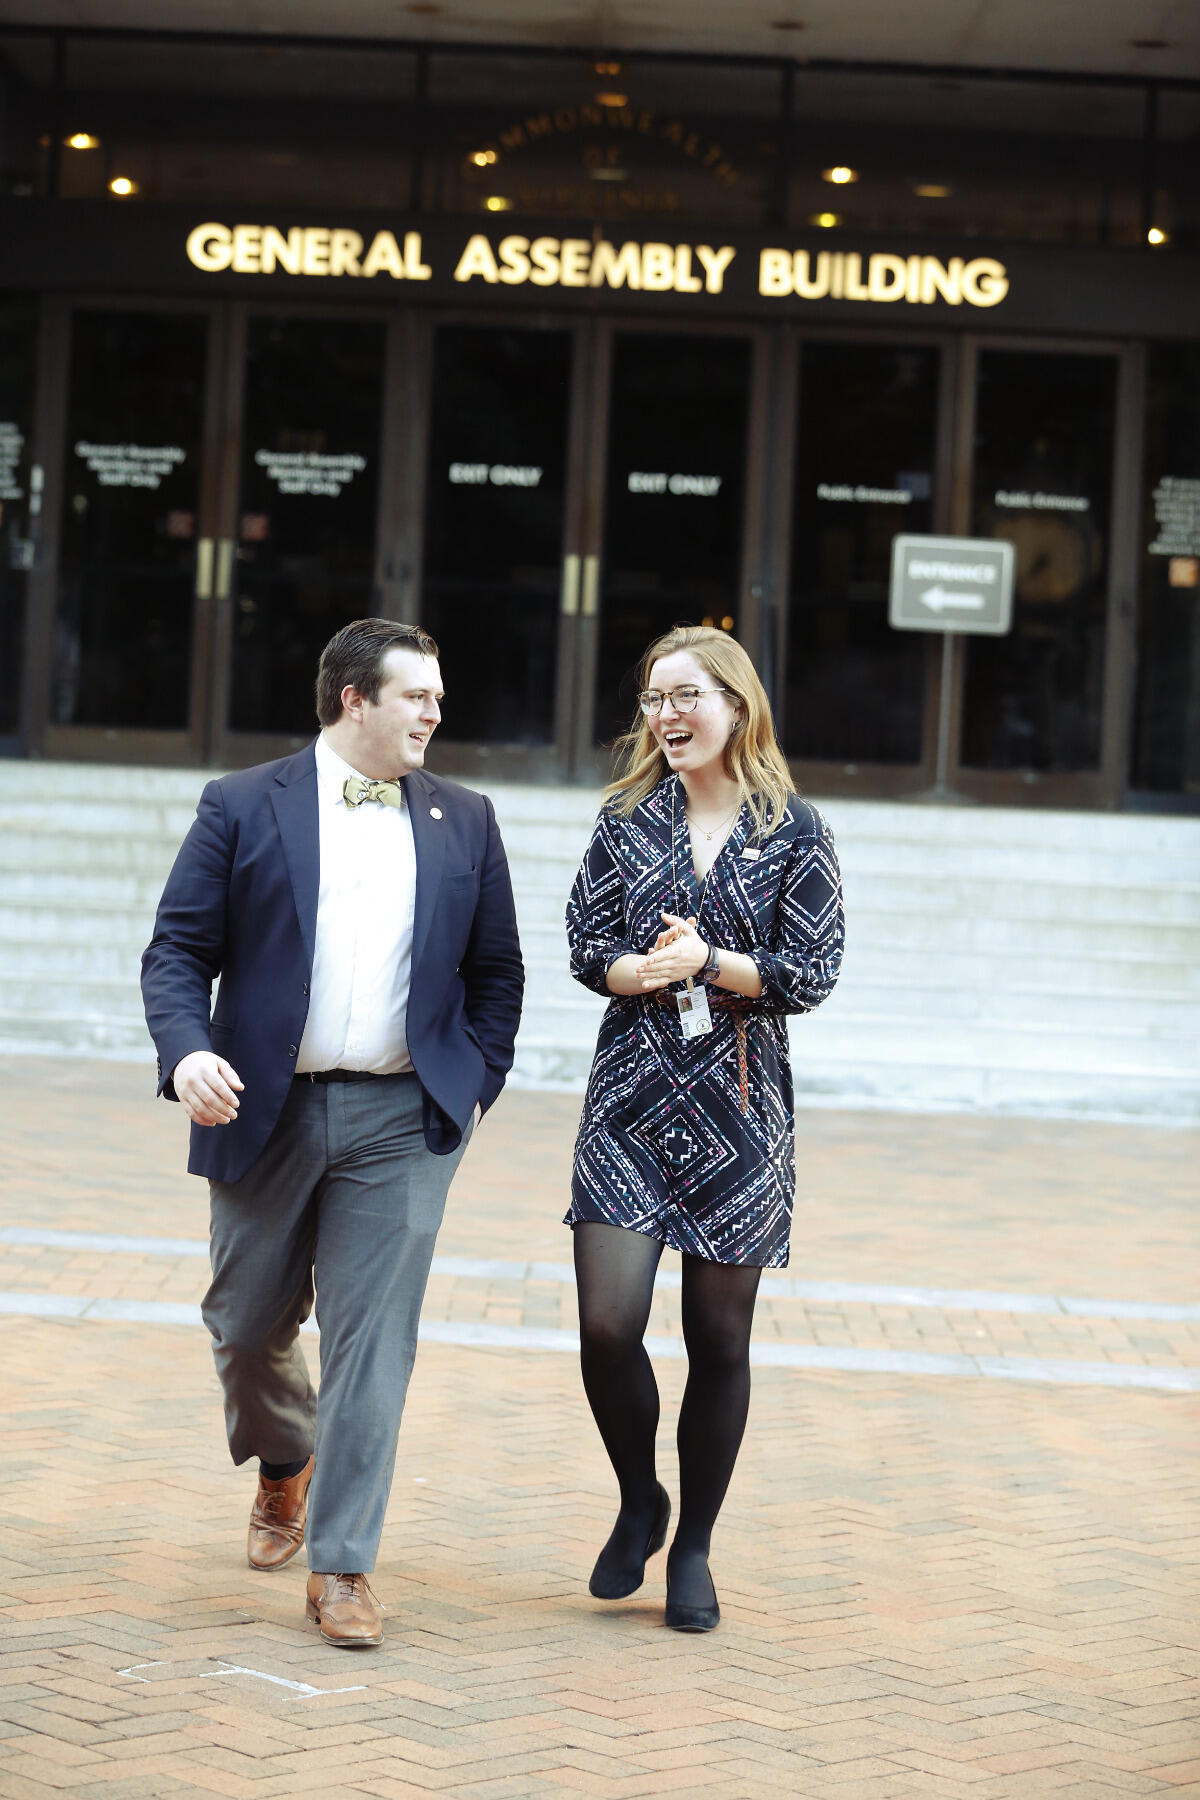 Brian Bailey and Julia Carney catch up on legislative business as they leave the General Assembly Building.
